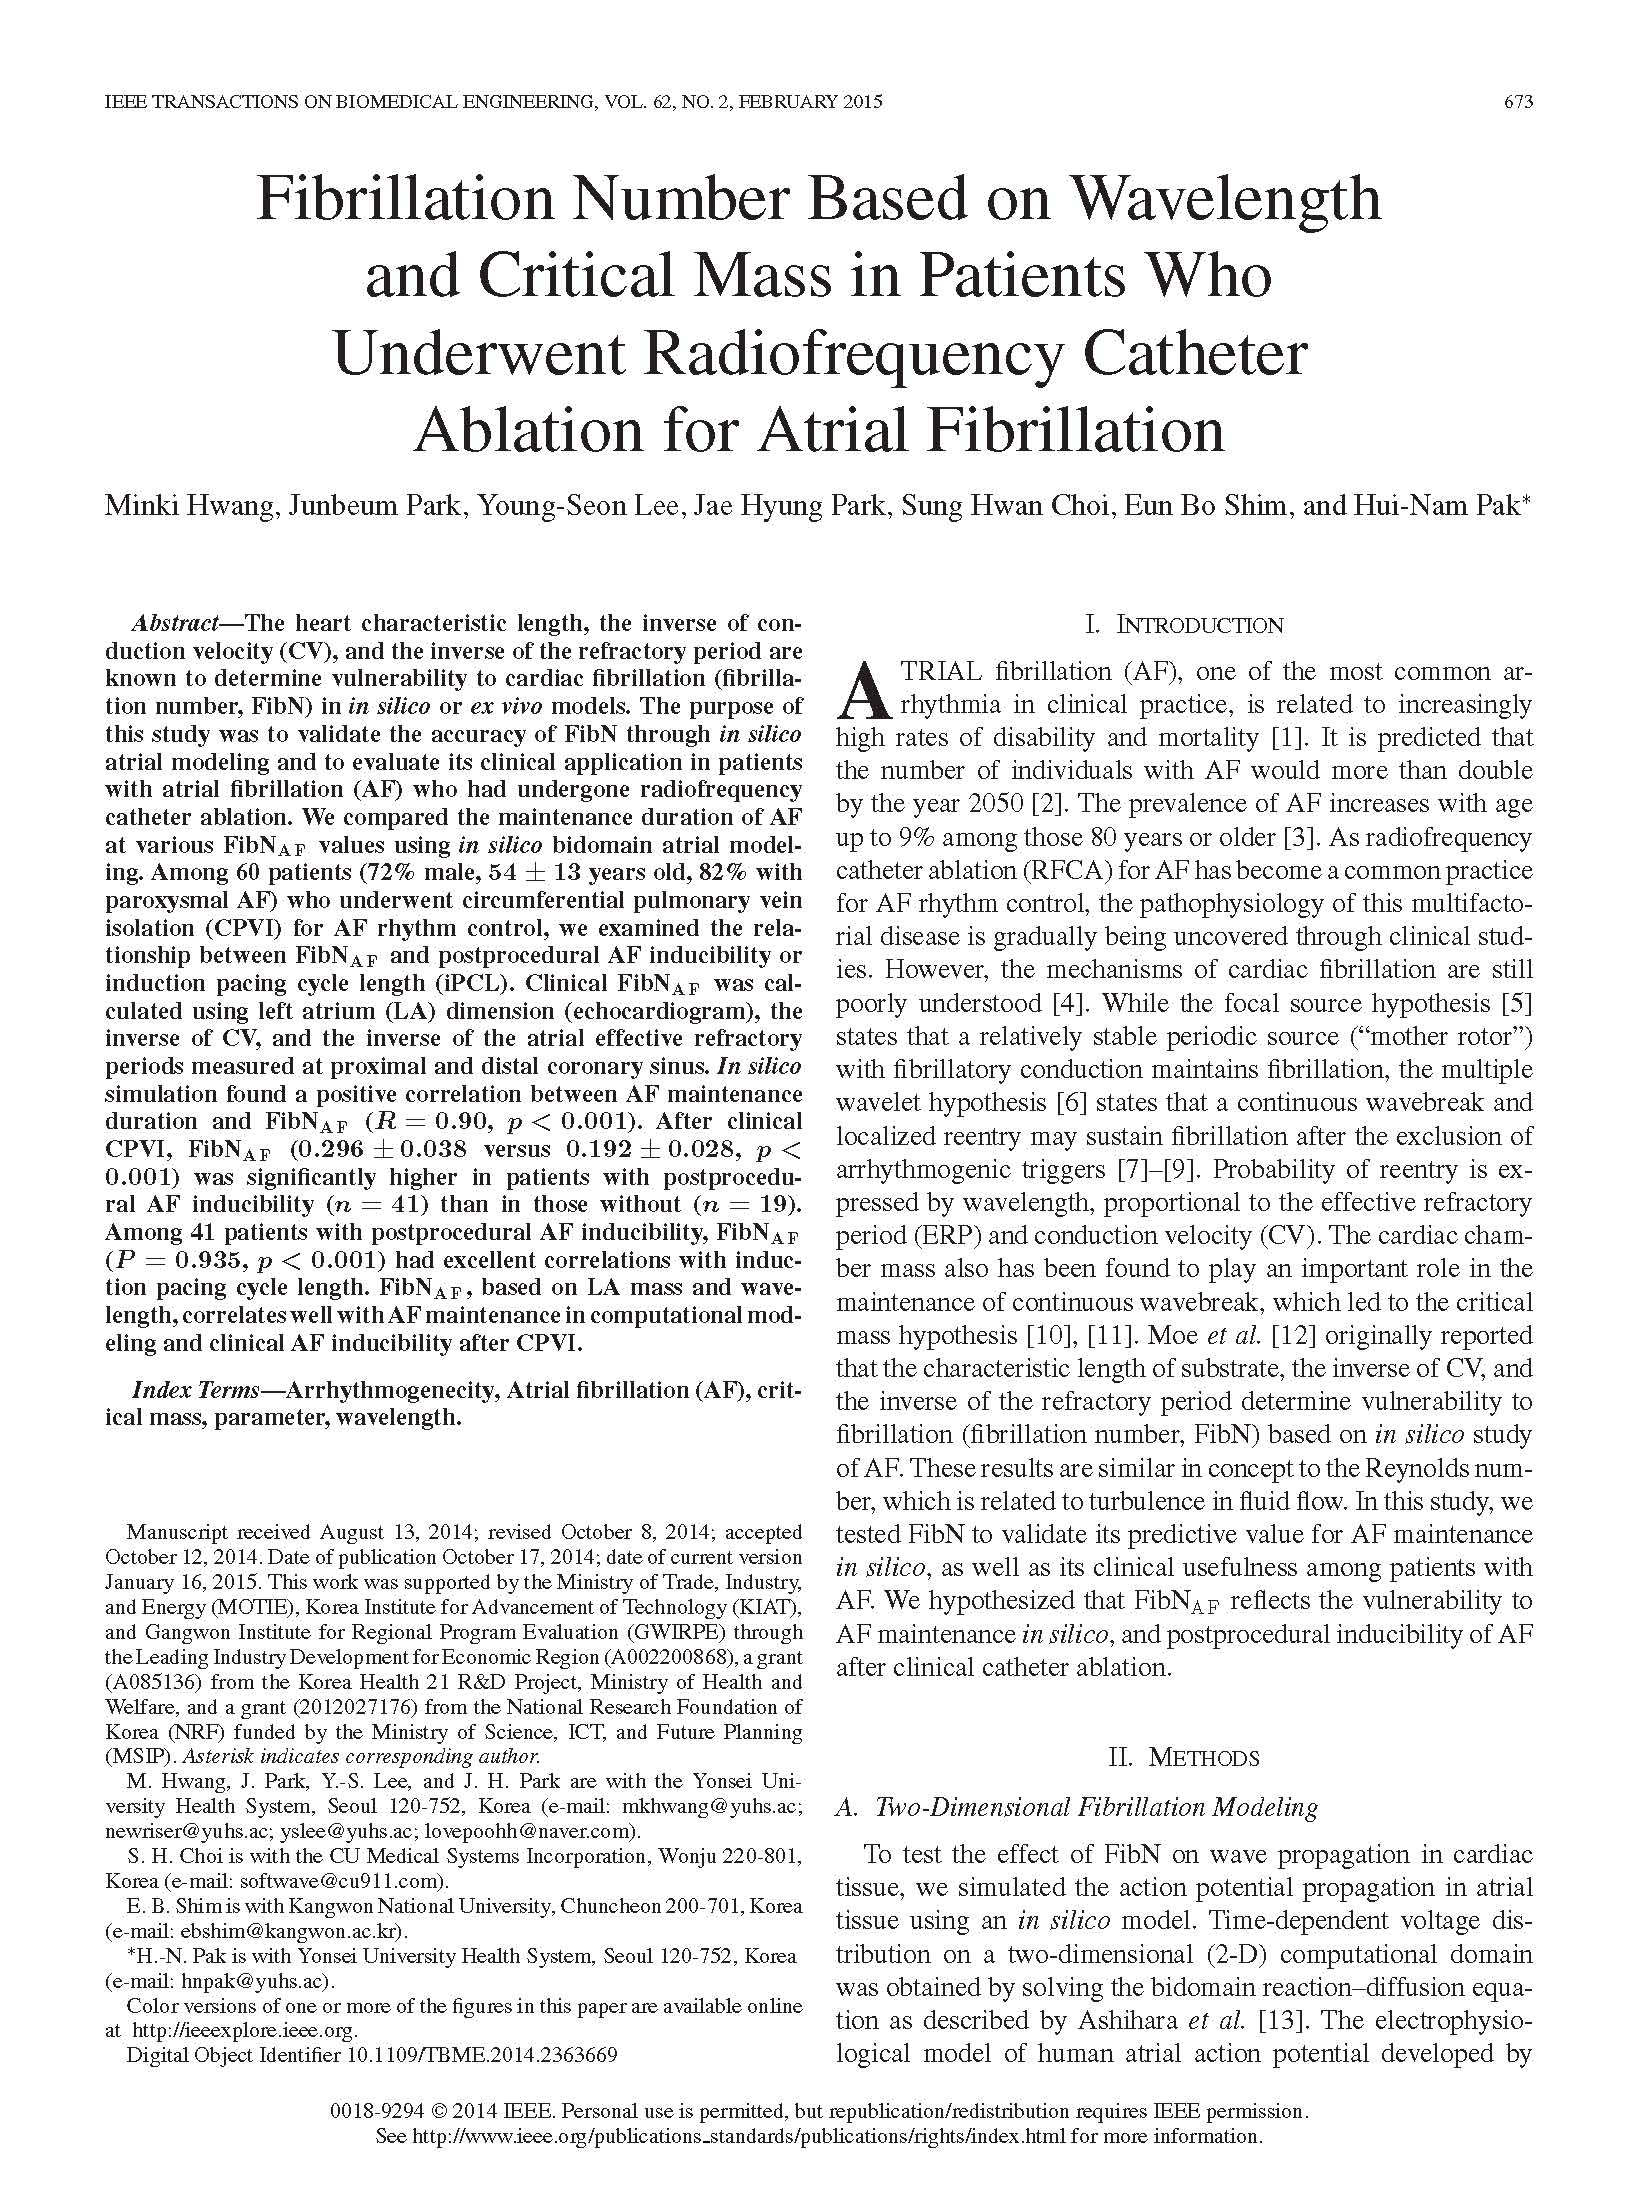 Fibrillation Number Based on Wavelength and Critical Mass in Patients Who Underwent Radiofrequency Catheter Ablation for Atrial Fibrillation.jpg 1650X2200